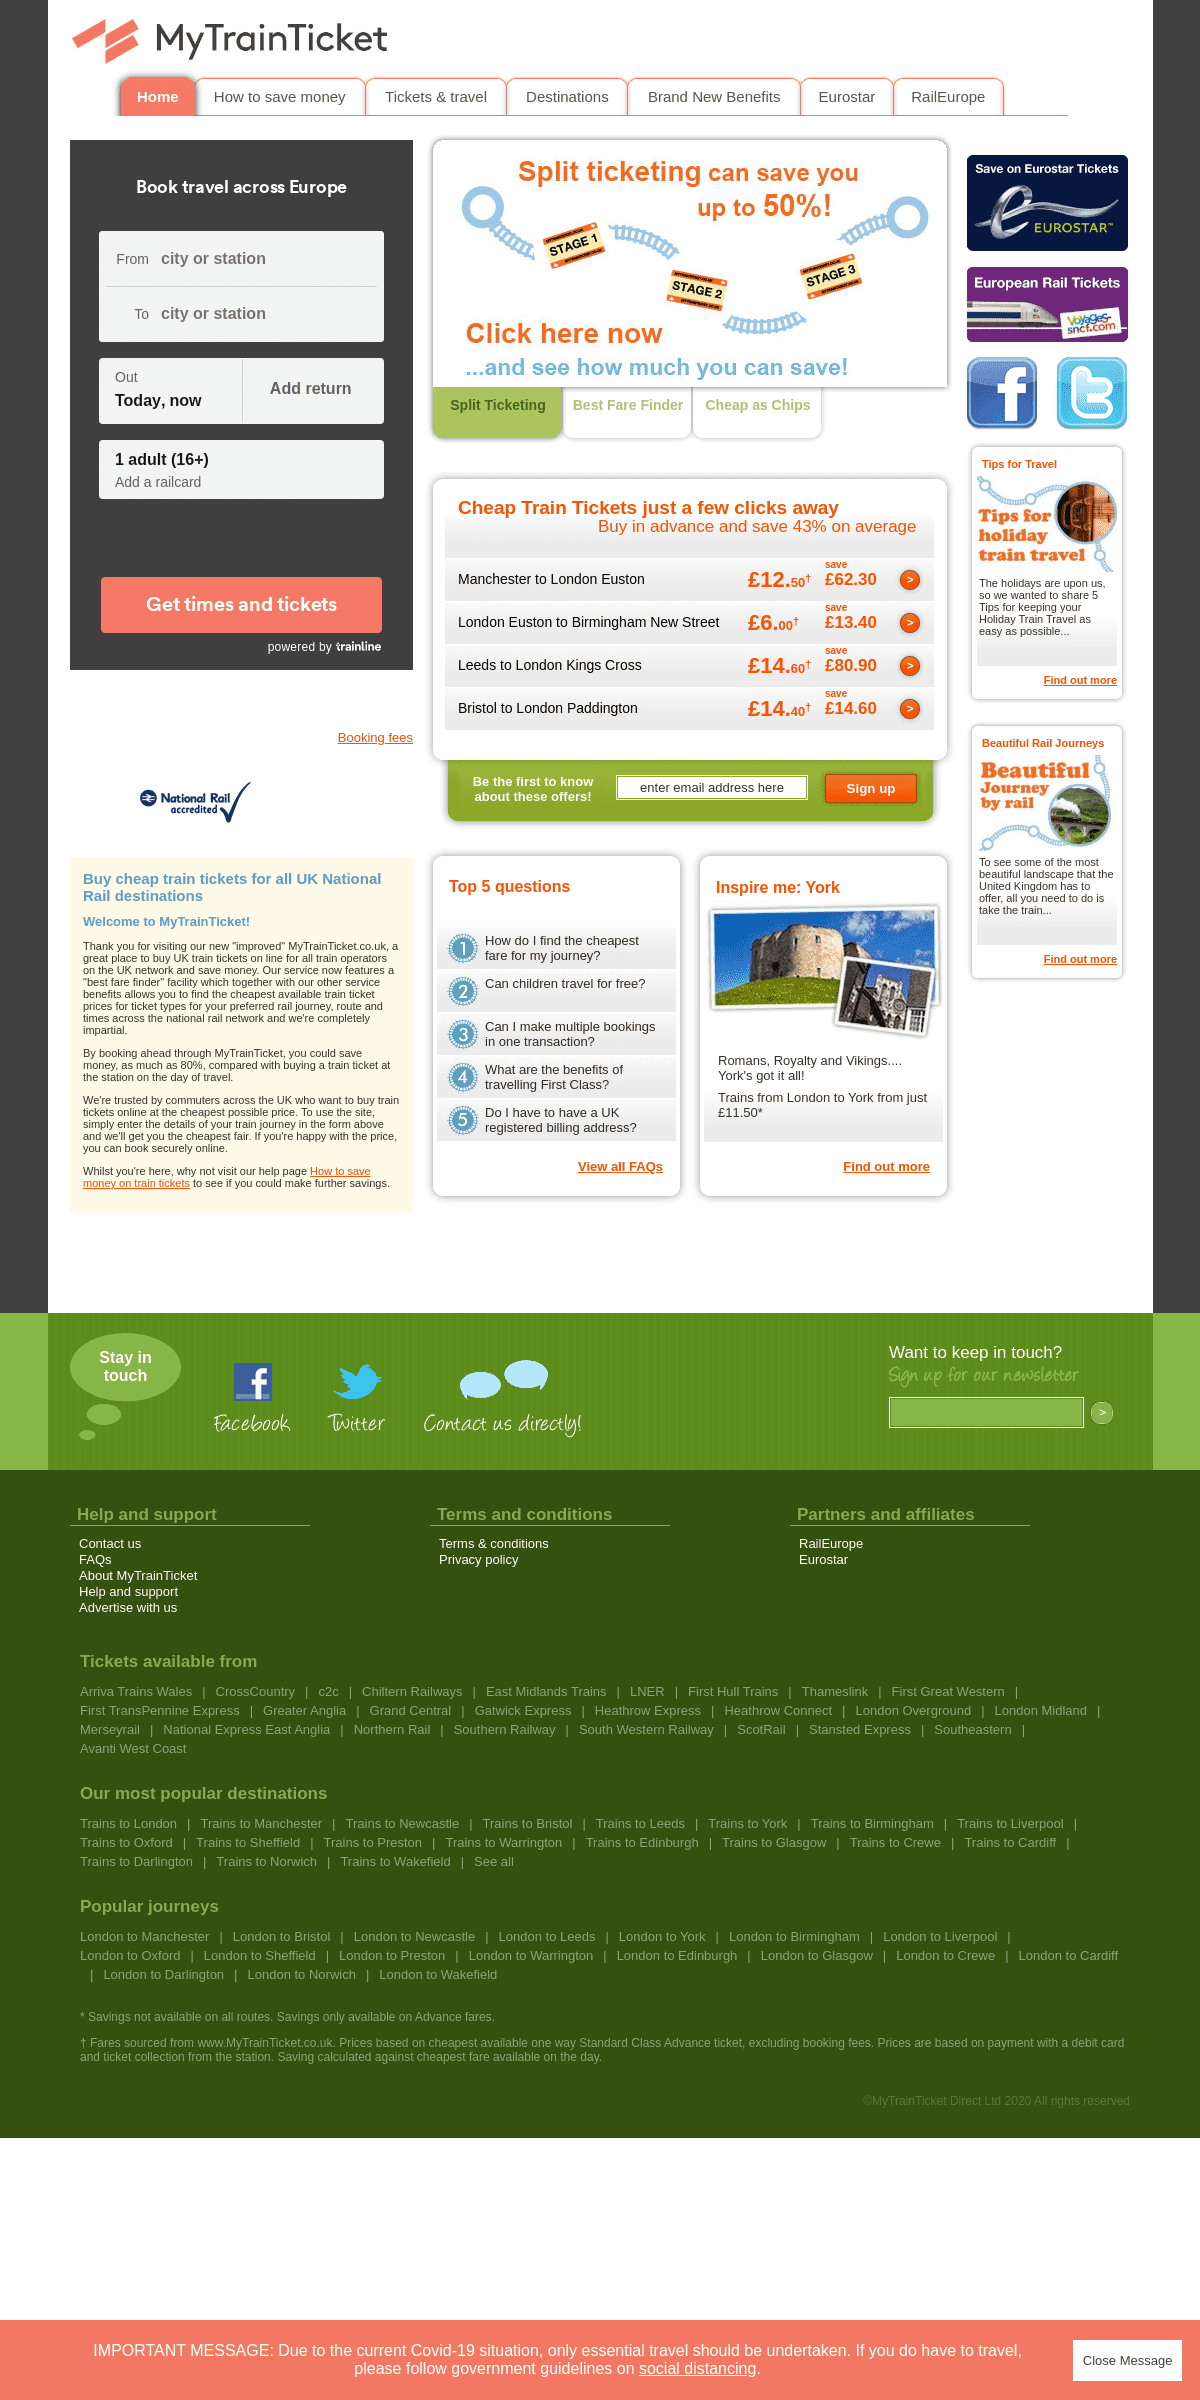 A complete backup of mytrainticket.co.uk